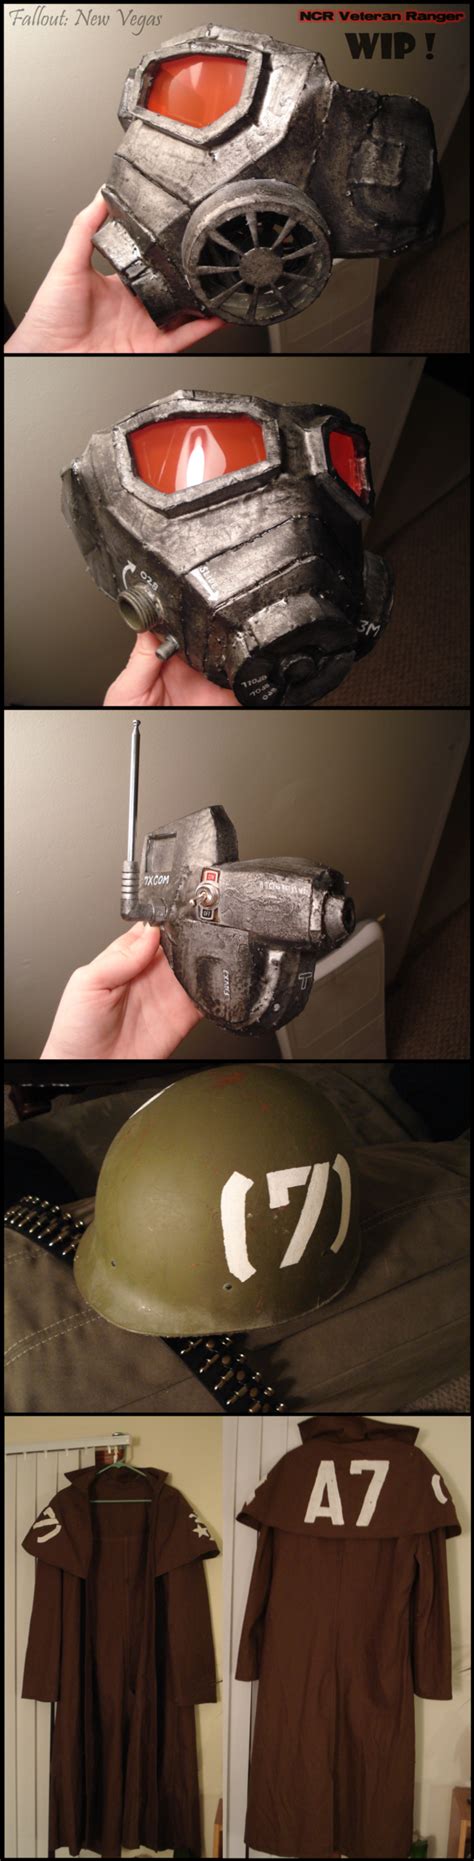 Fallout Ncr Ranger Cosplay Wip By Allyson On